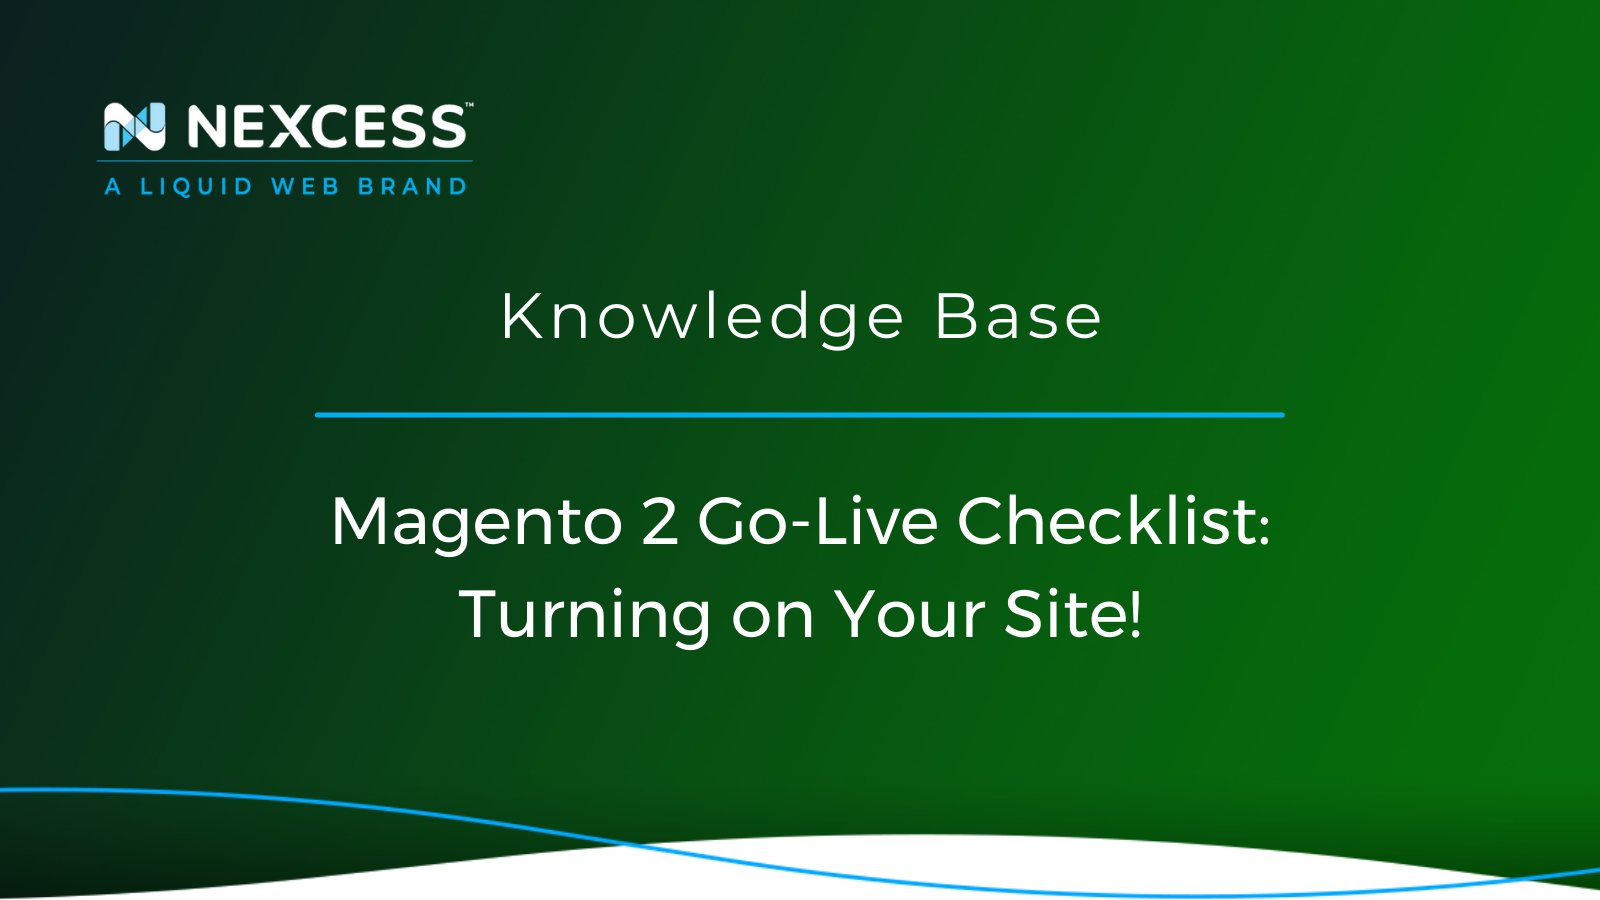 Magento 2 Go-Live Checklist: Turning on Your Site!